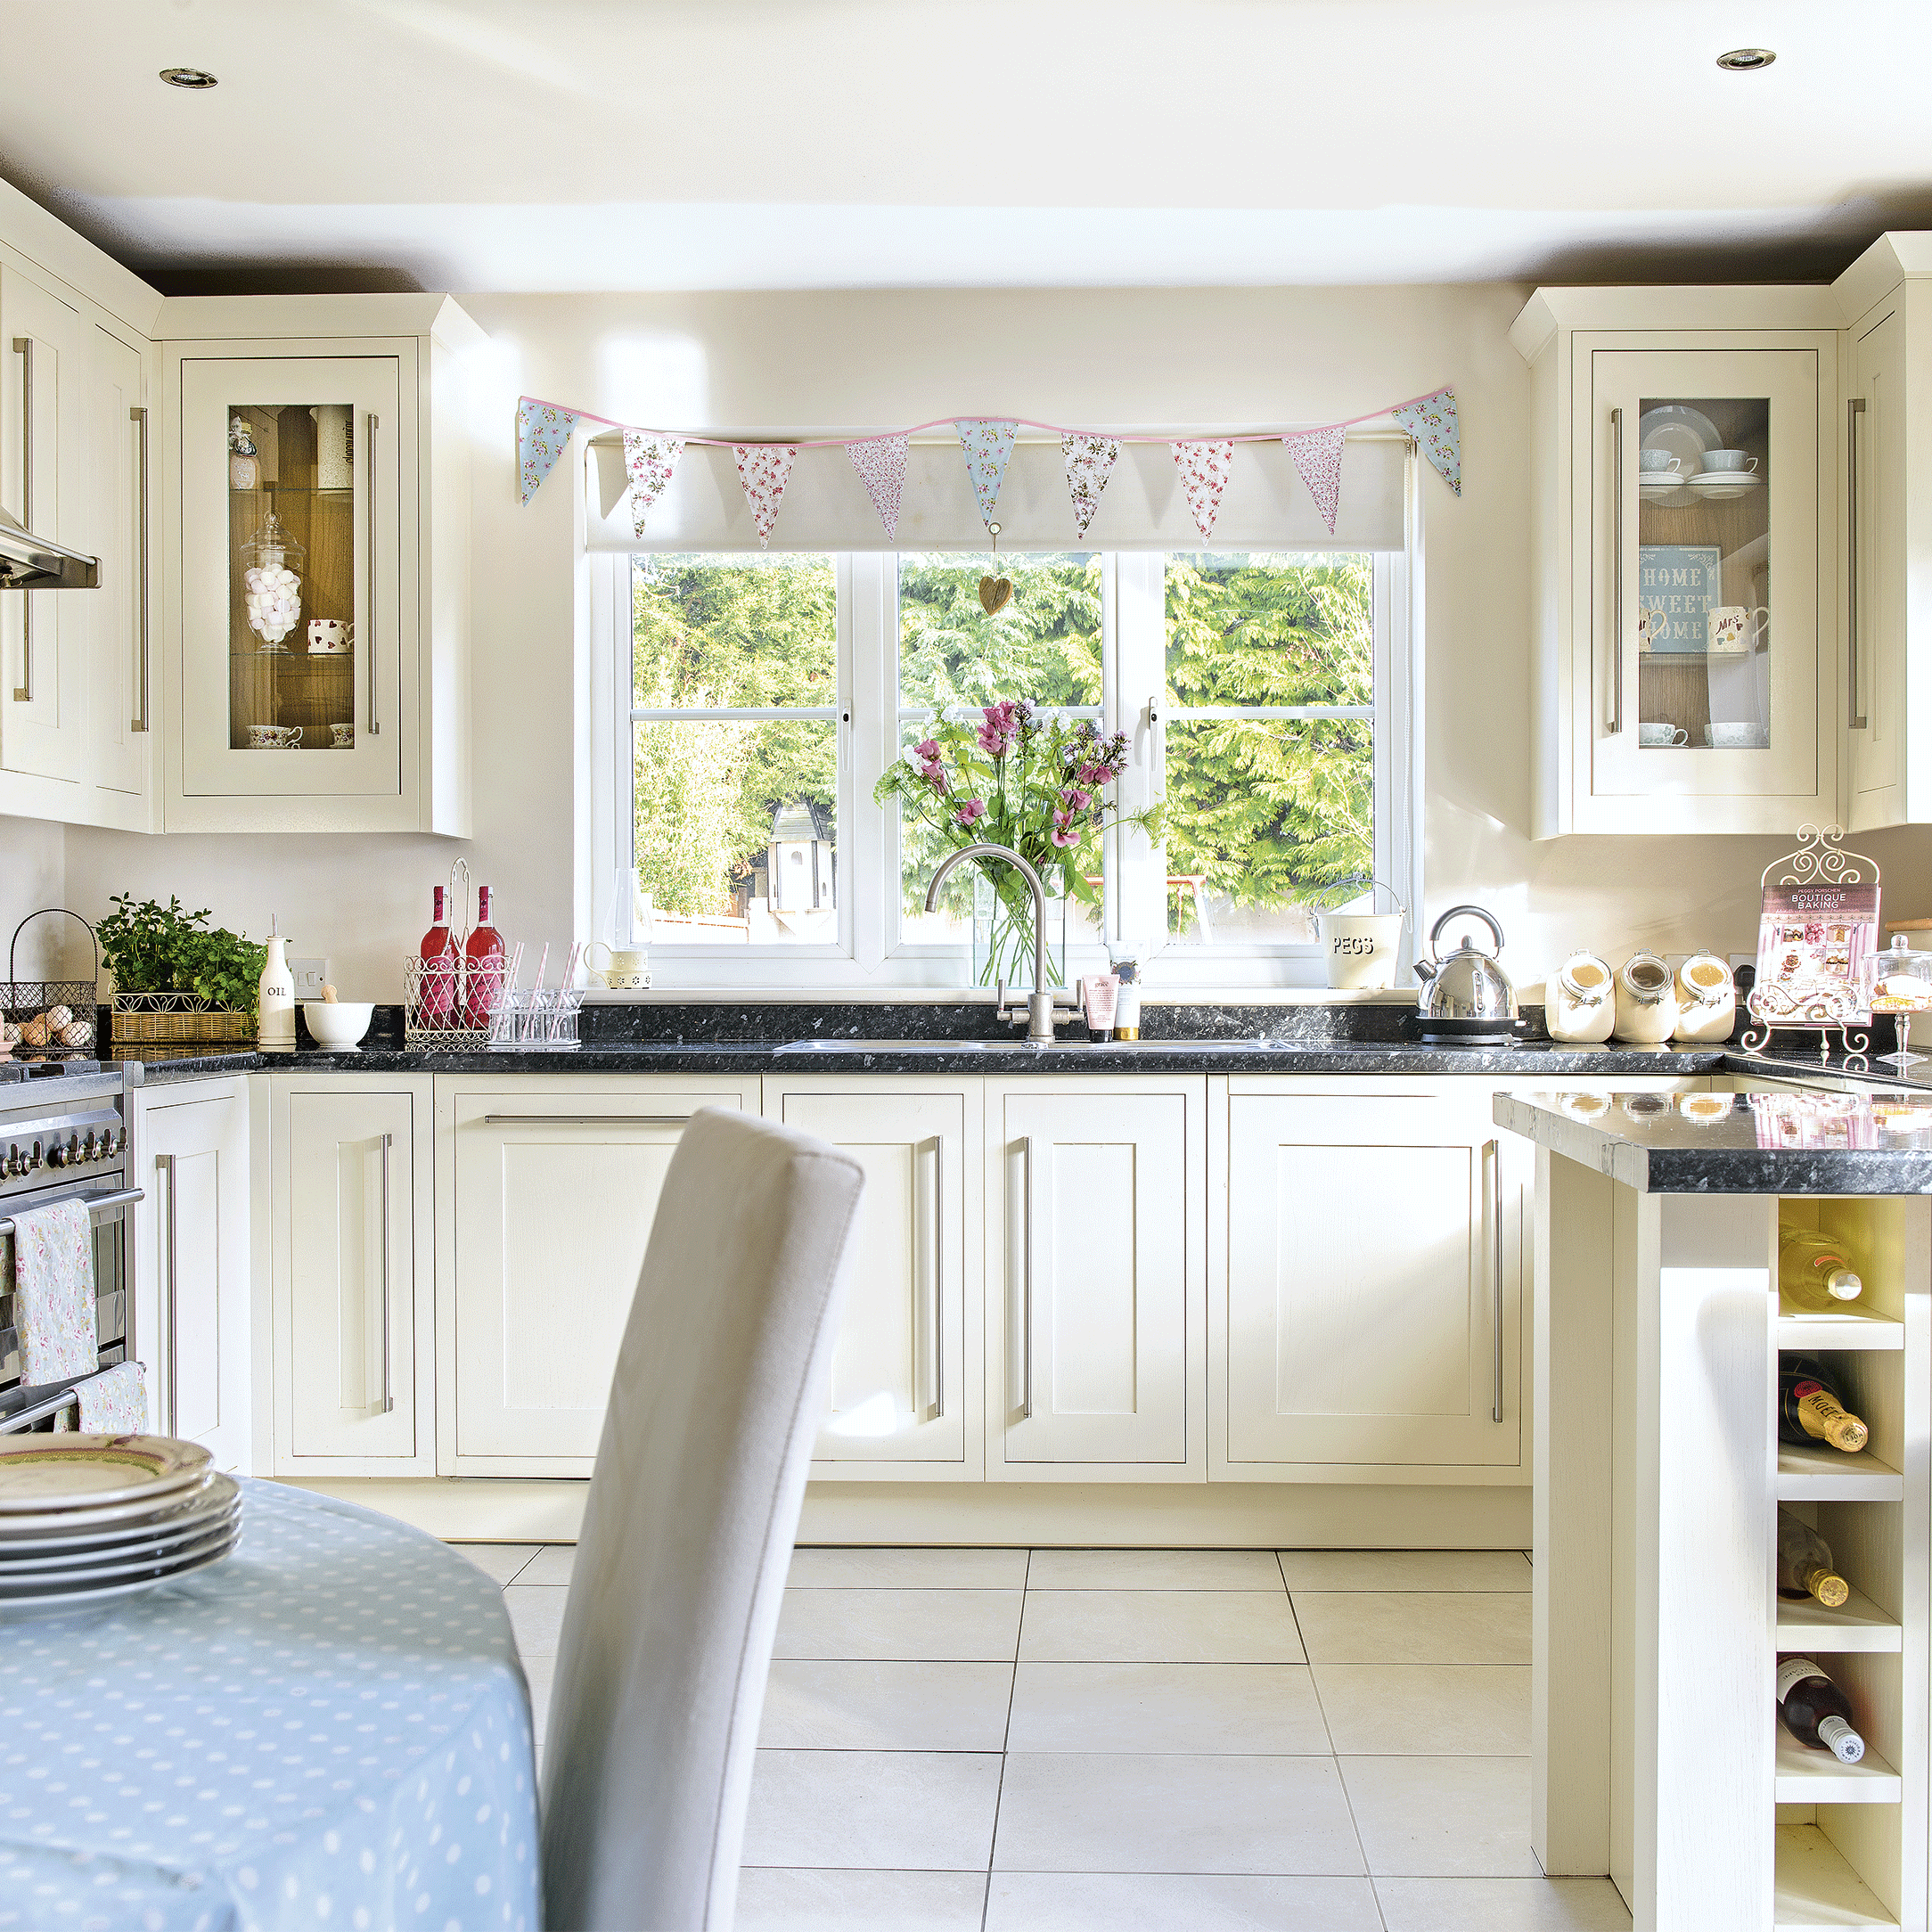 Kitchen | Gloucestershire family home | House tour | PHOTO GALLERY | Style at Home | Housetohome.co.uk